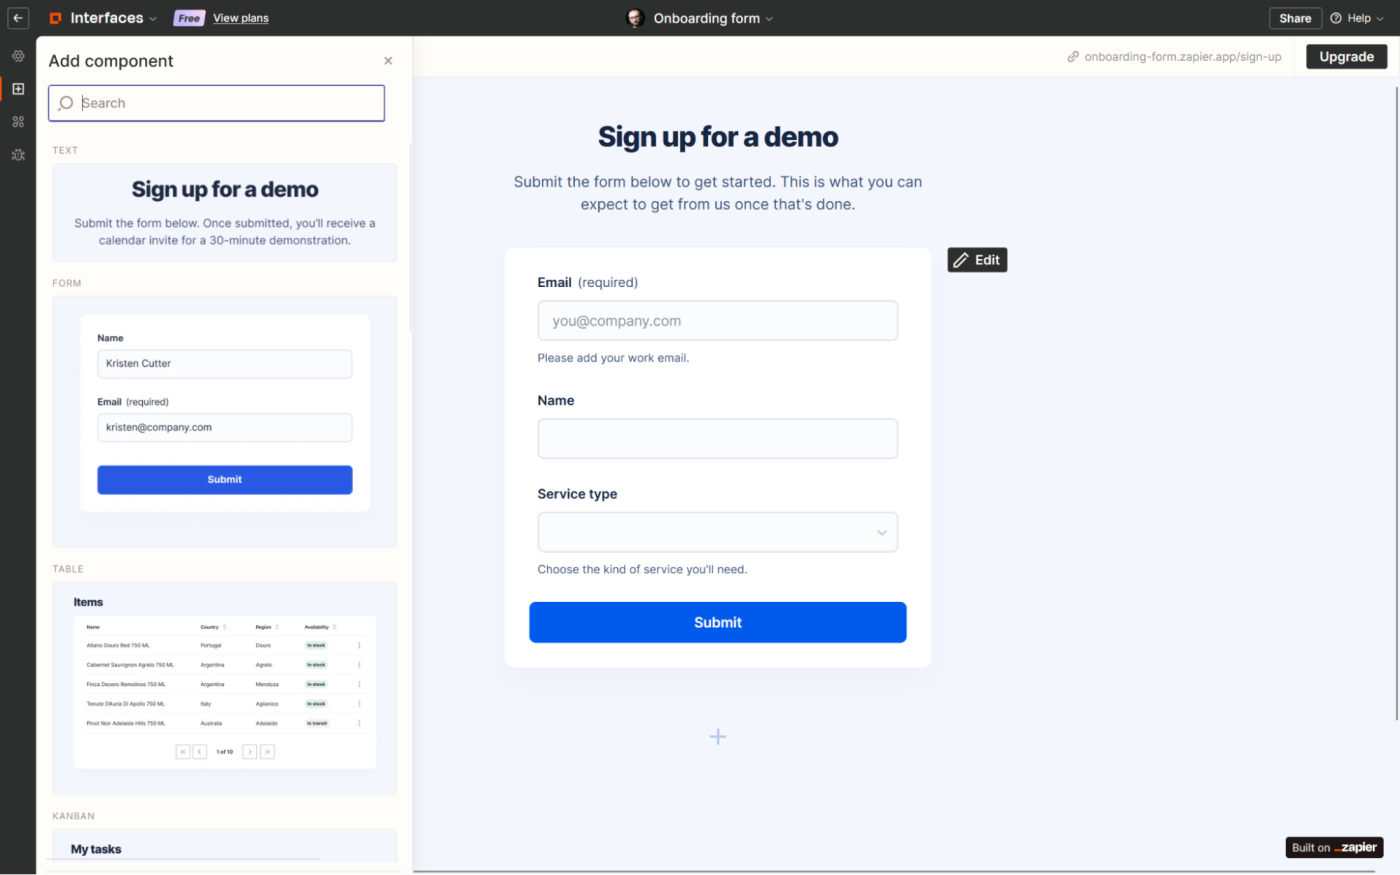 Zapier Interfaces, our pick for the best online form builder app for automation